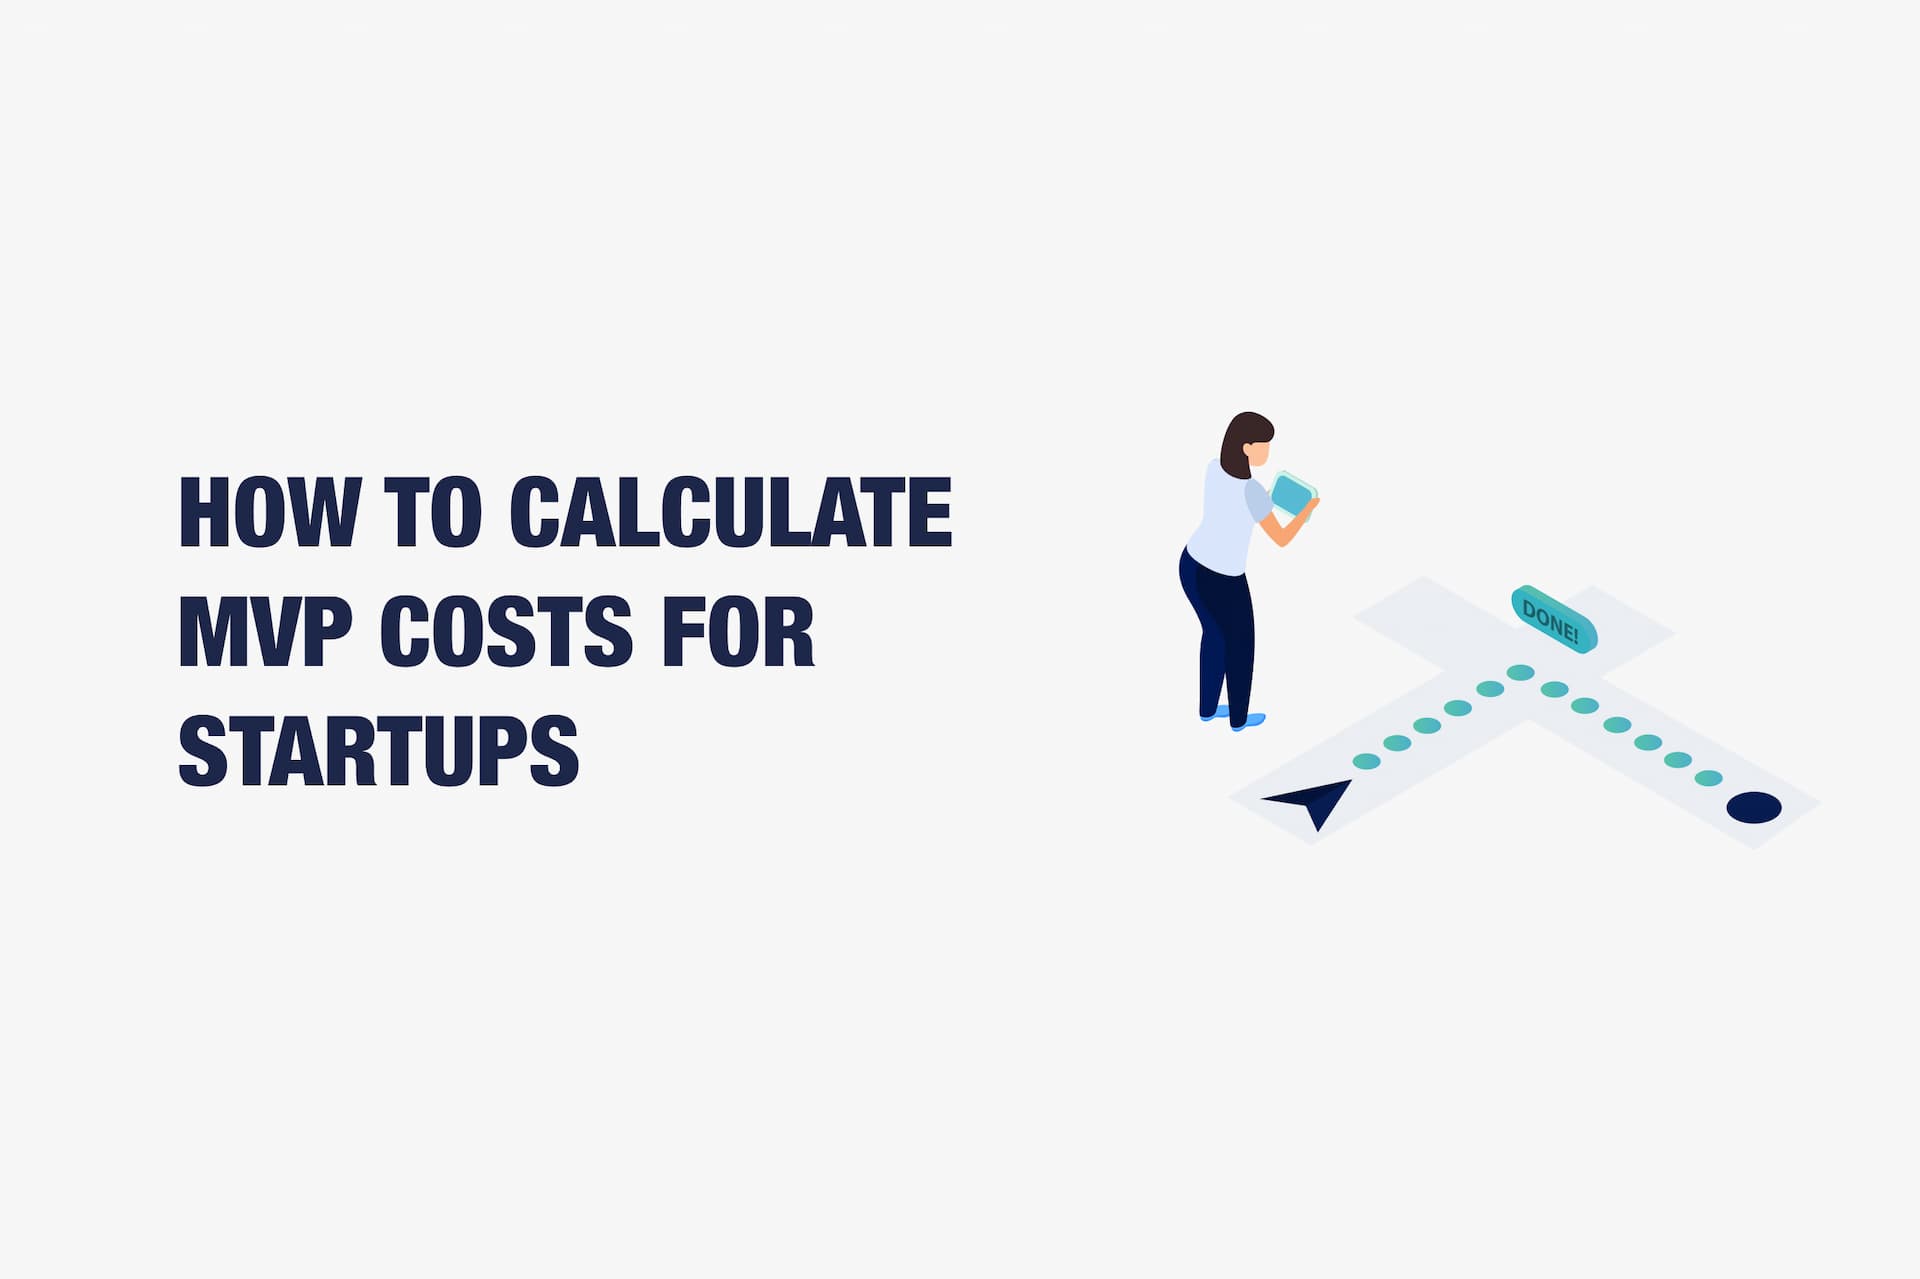 How to Calculate MVP Costs for Startups